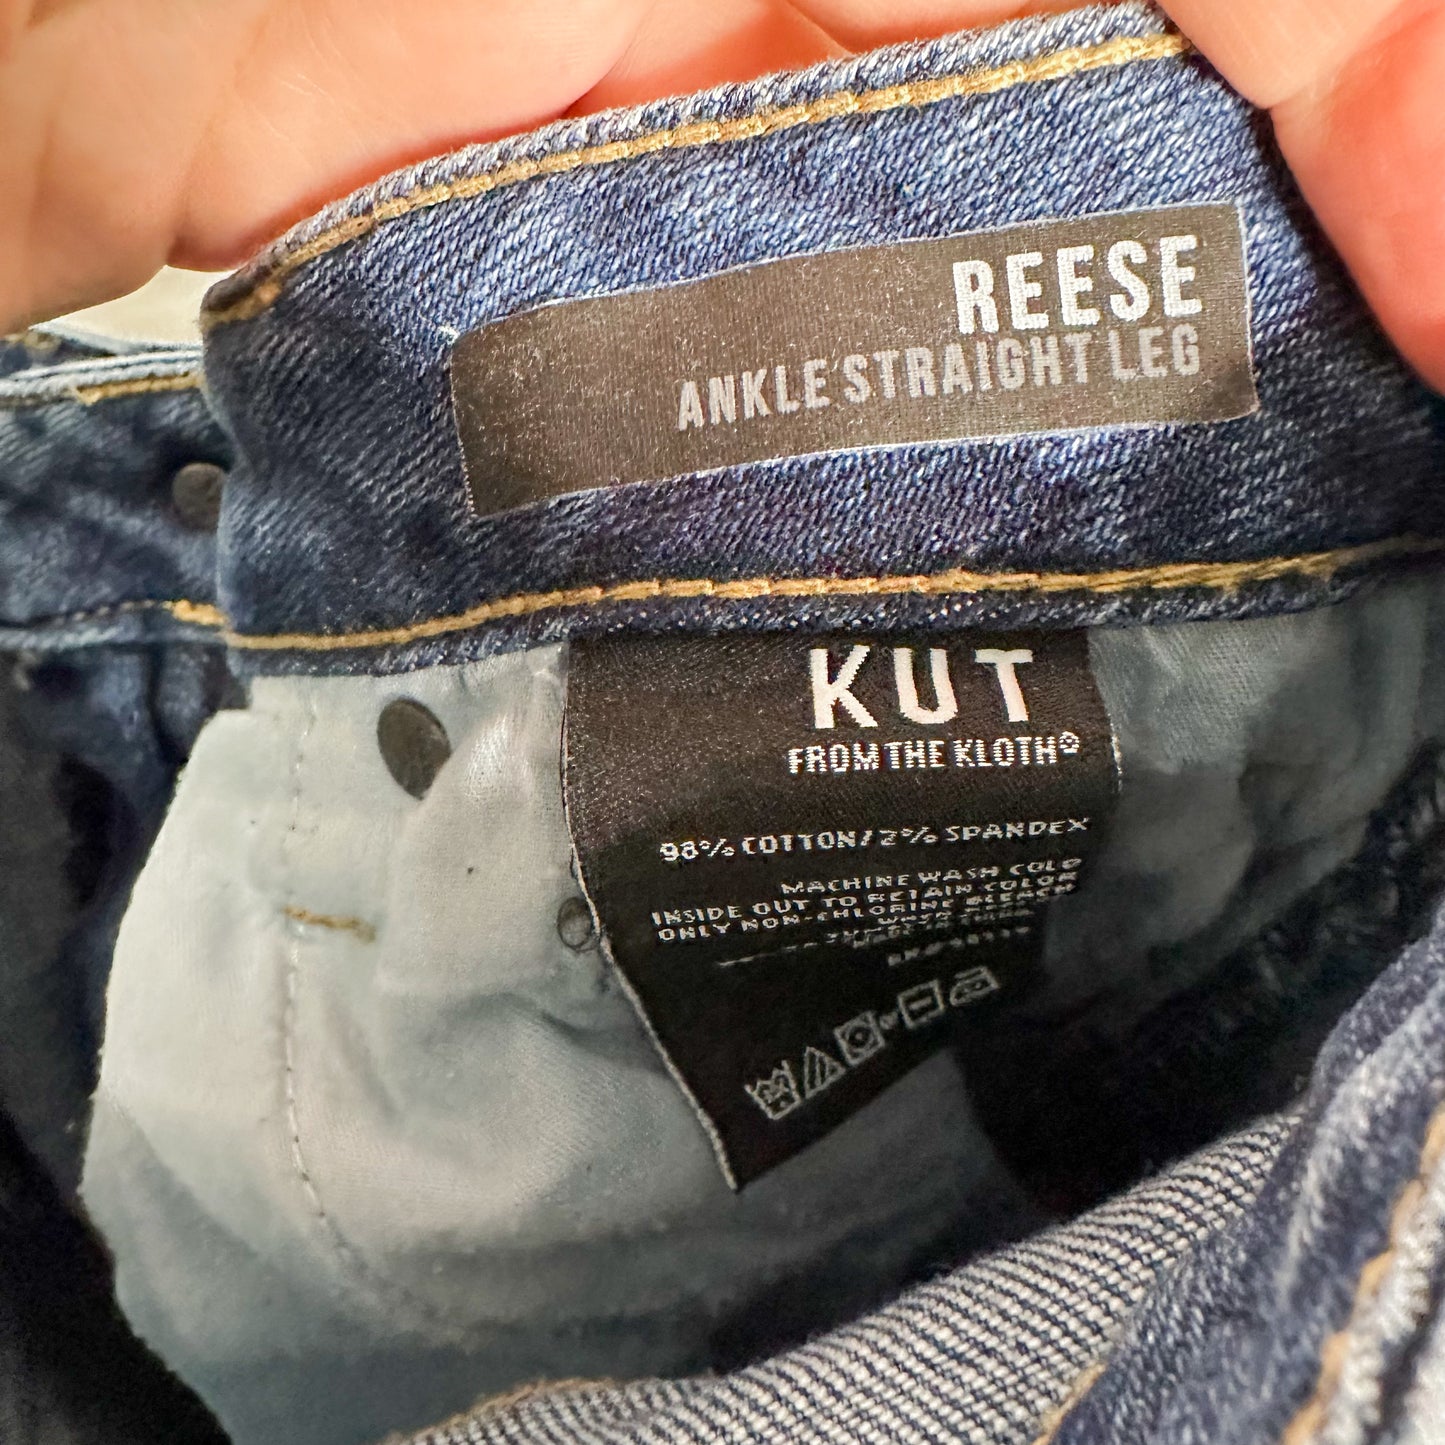 Kut from the Kloth Reese Ankle Straight Leg Jean (0)